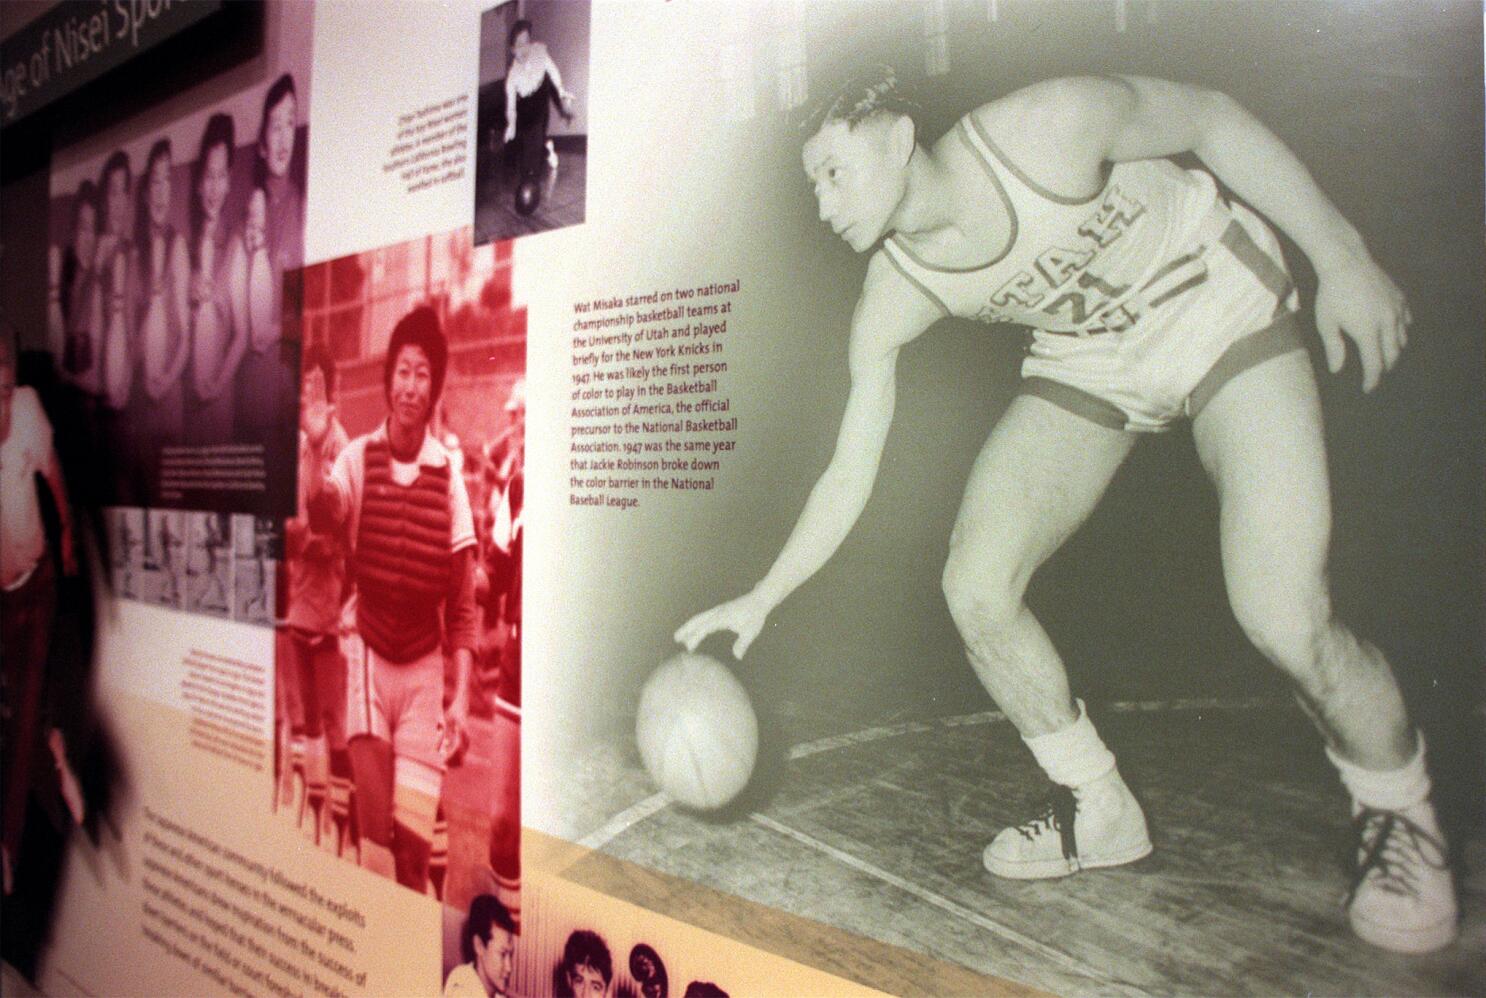 Wat Misaka, 1st non-white player in NBA, honored in Little Tokyo